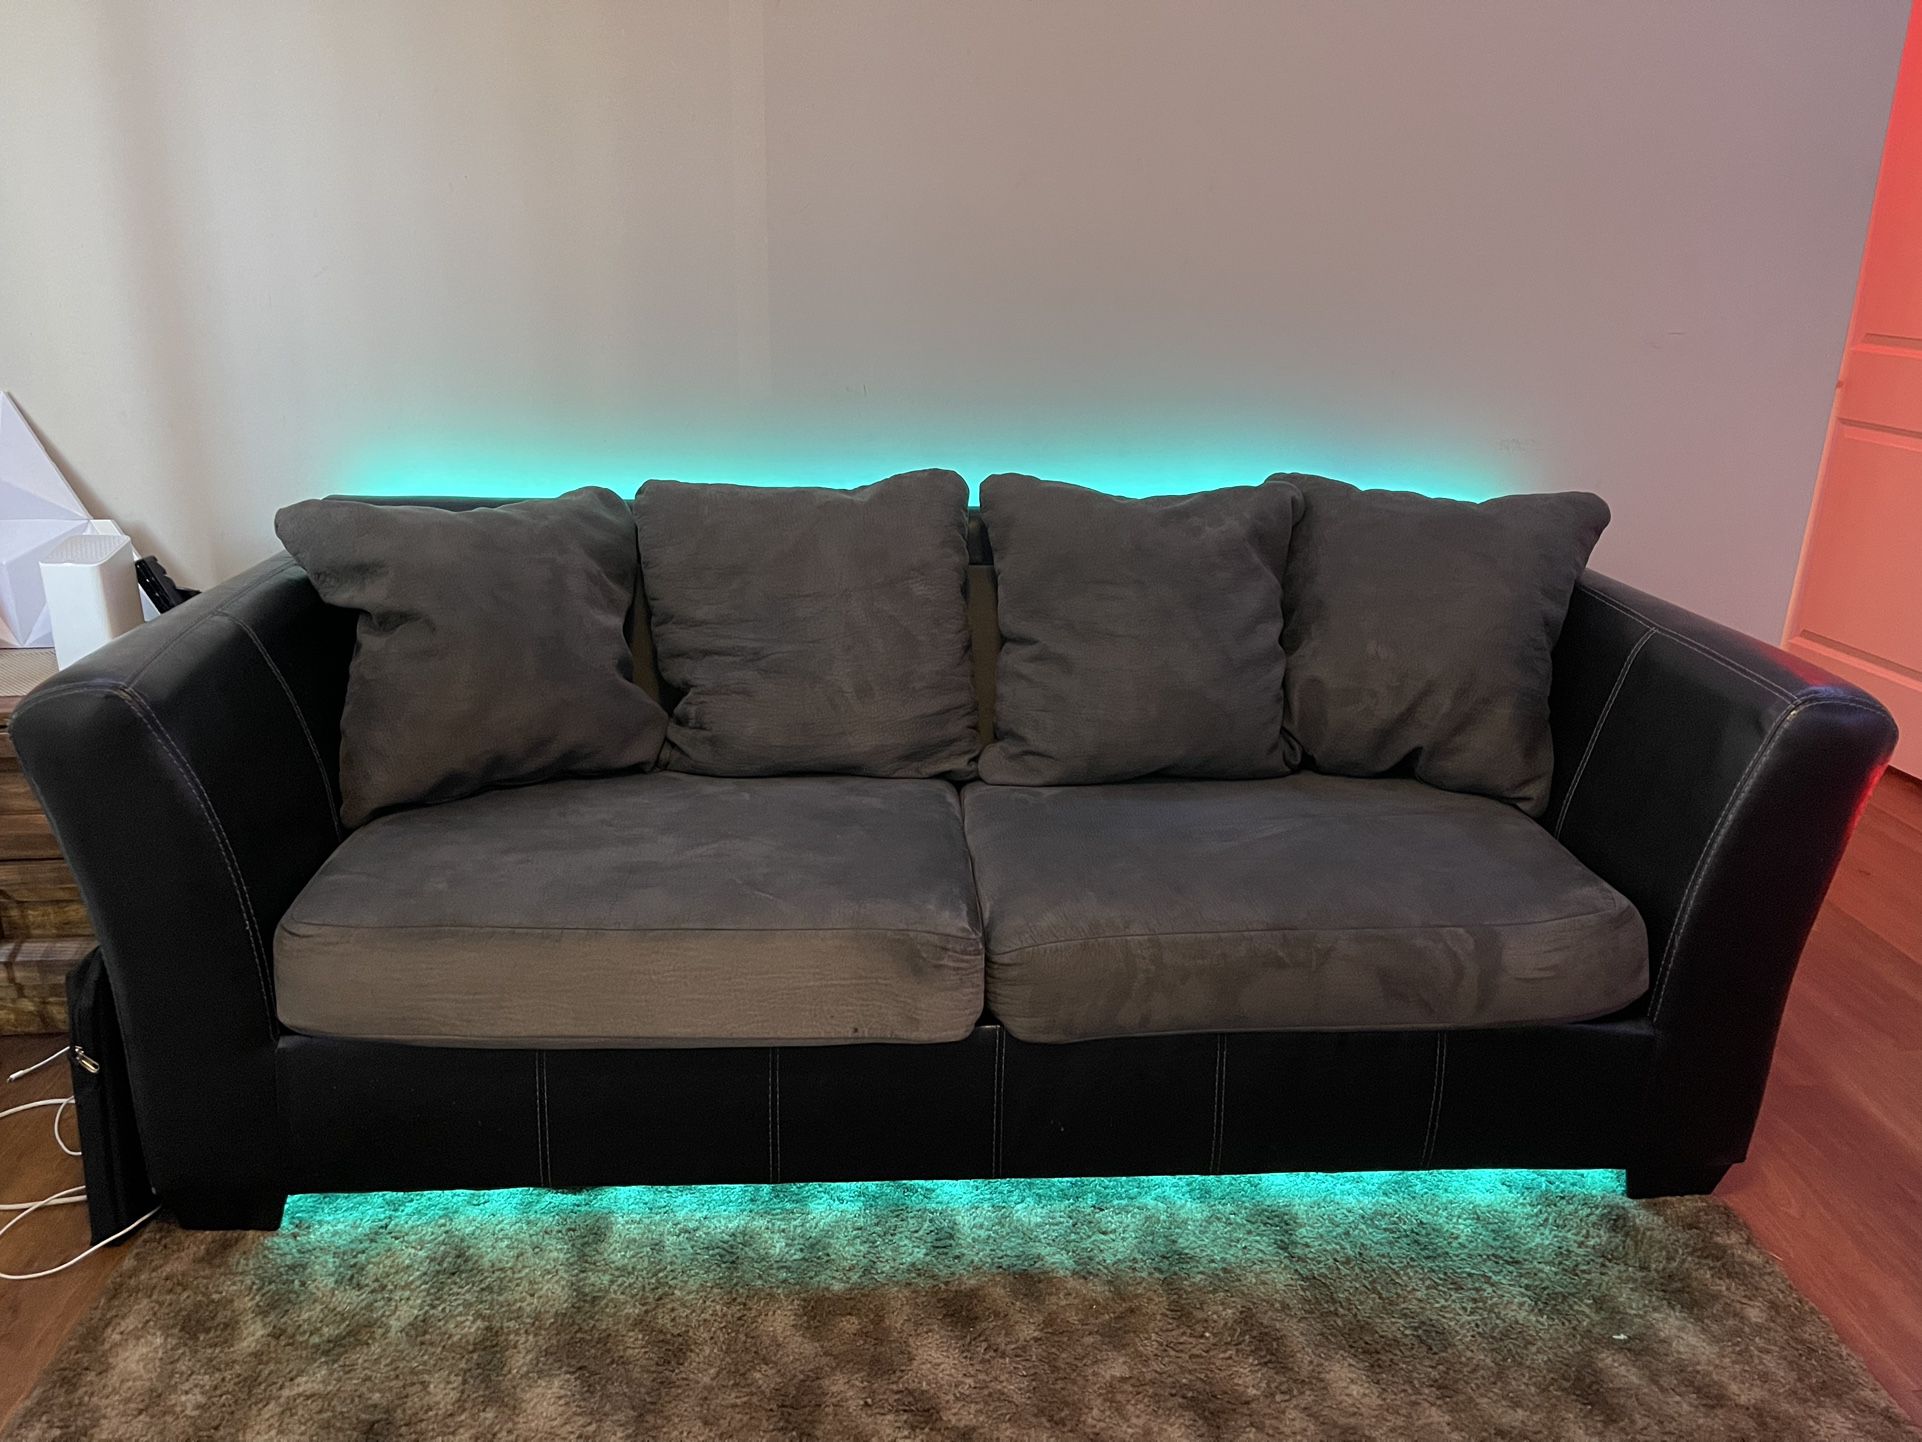 Black/Gray Leather And Suede Sofa (RGB LEDs)